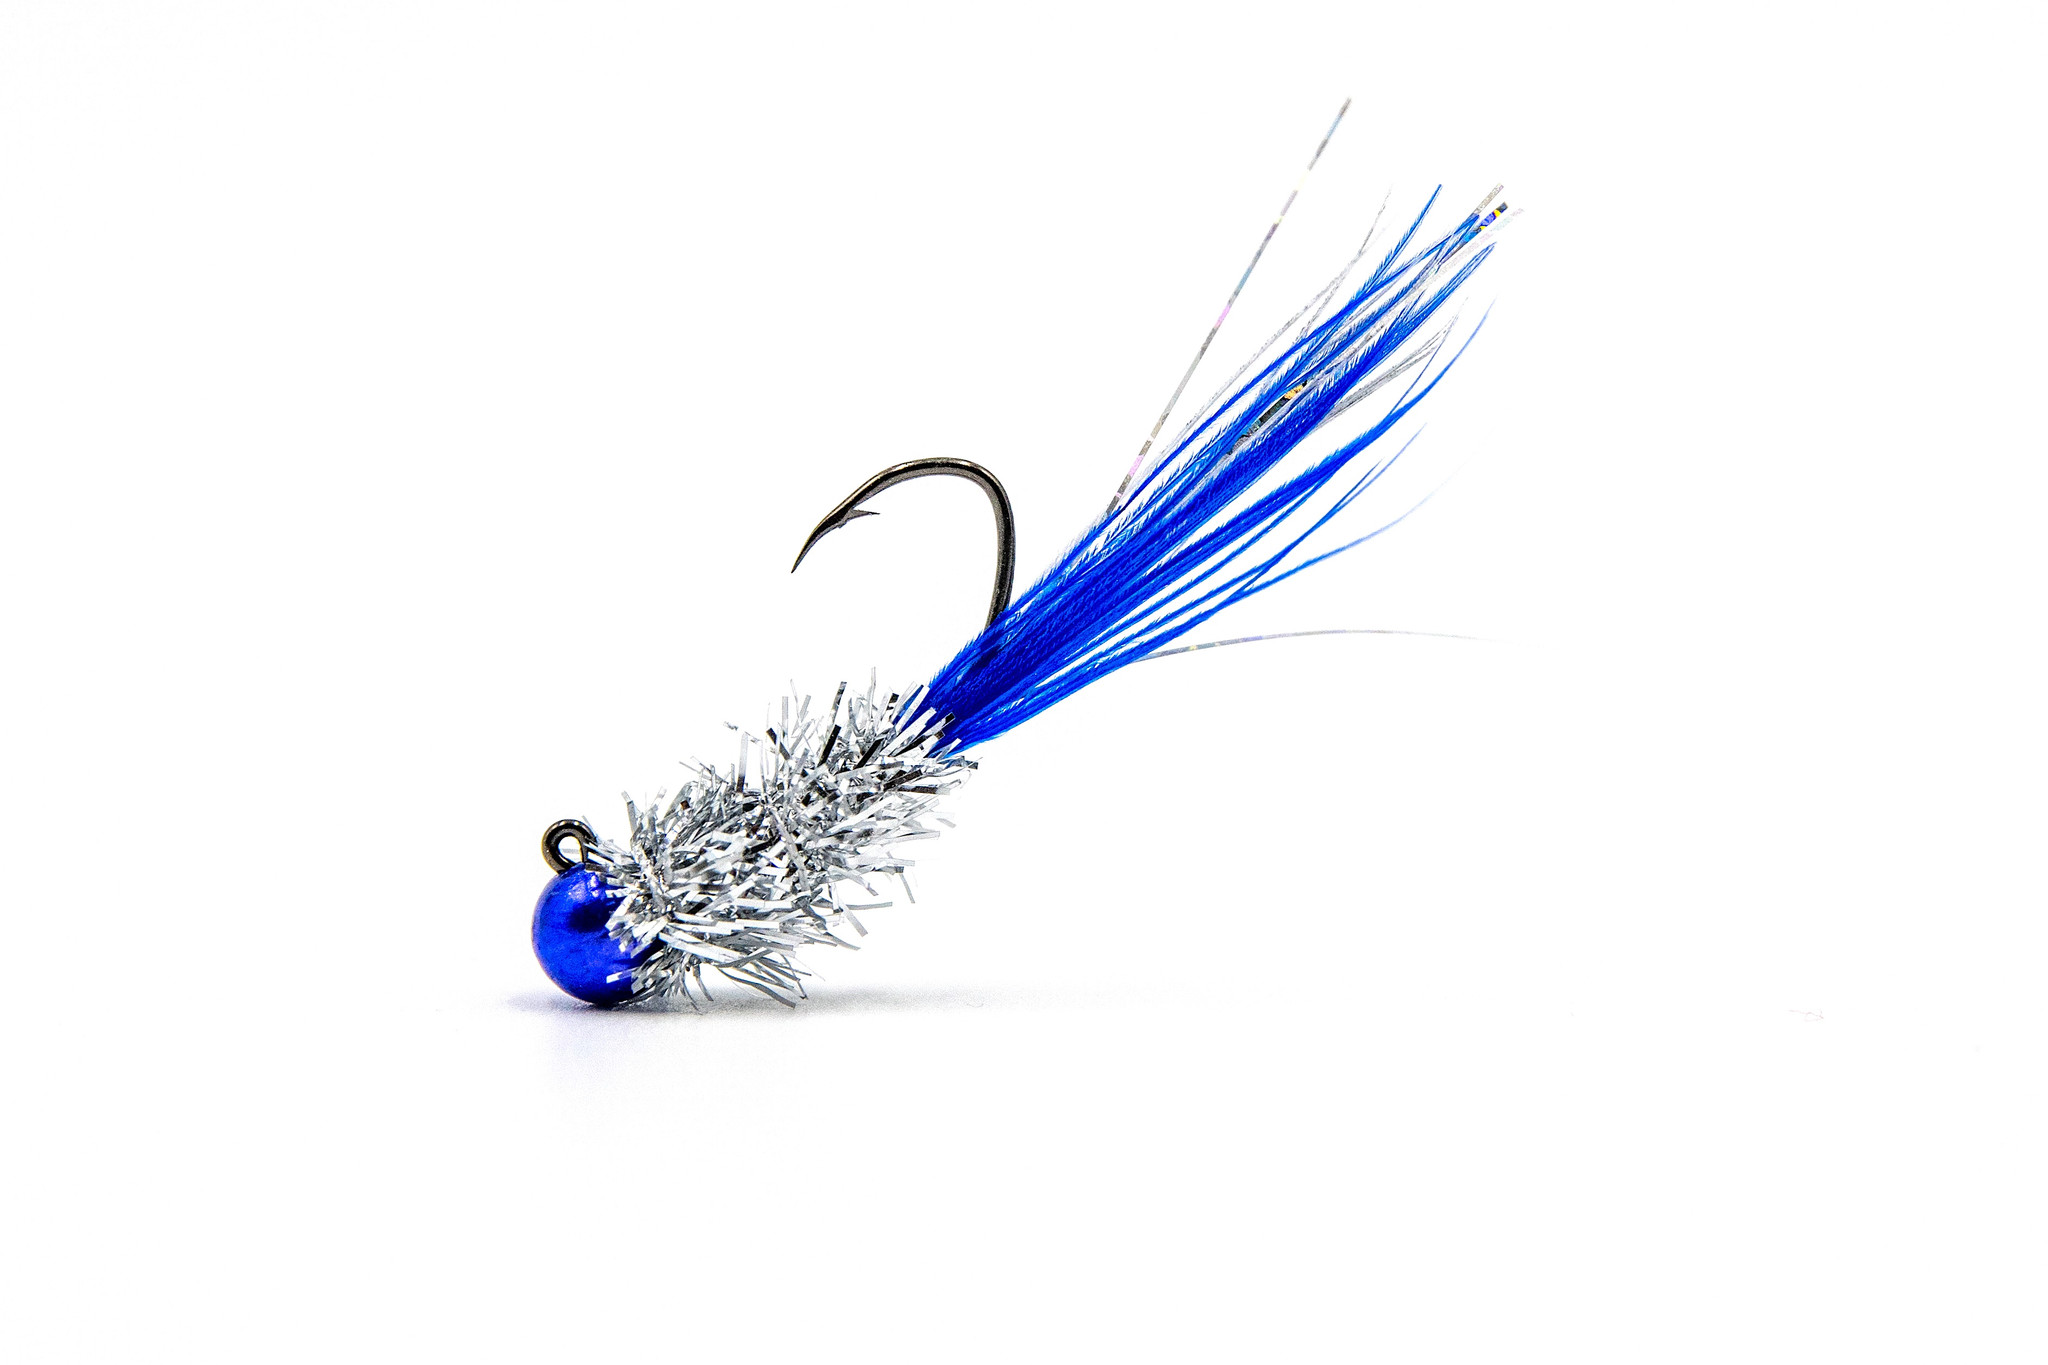 Small Deluxe Silicone Jig Box - Widow Maker Lures